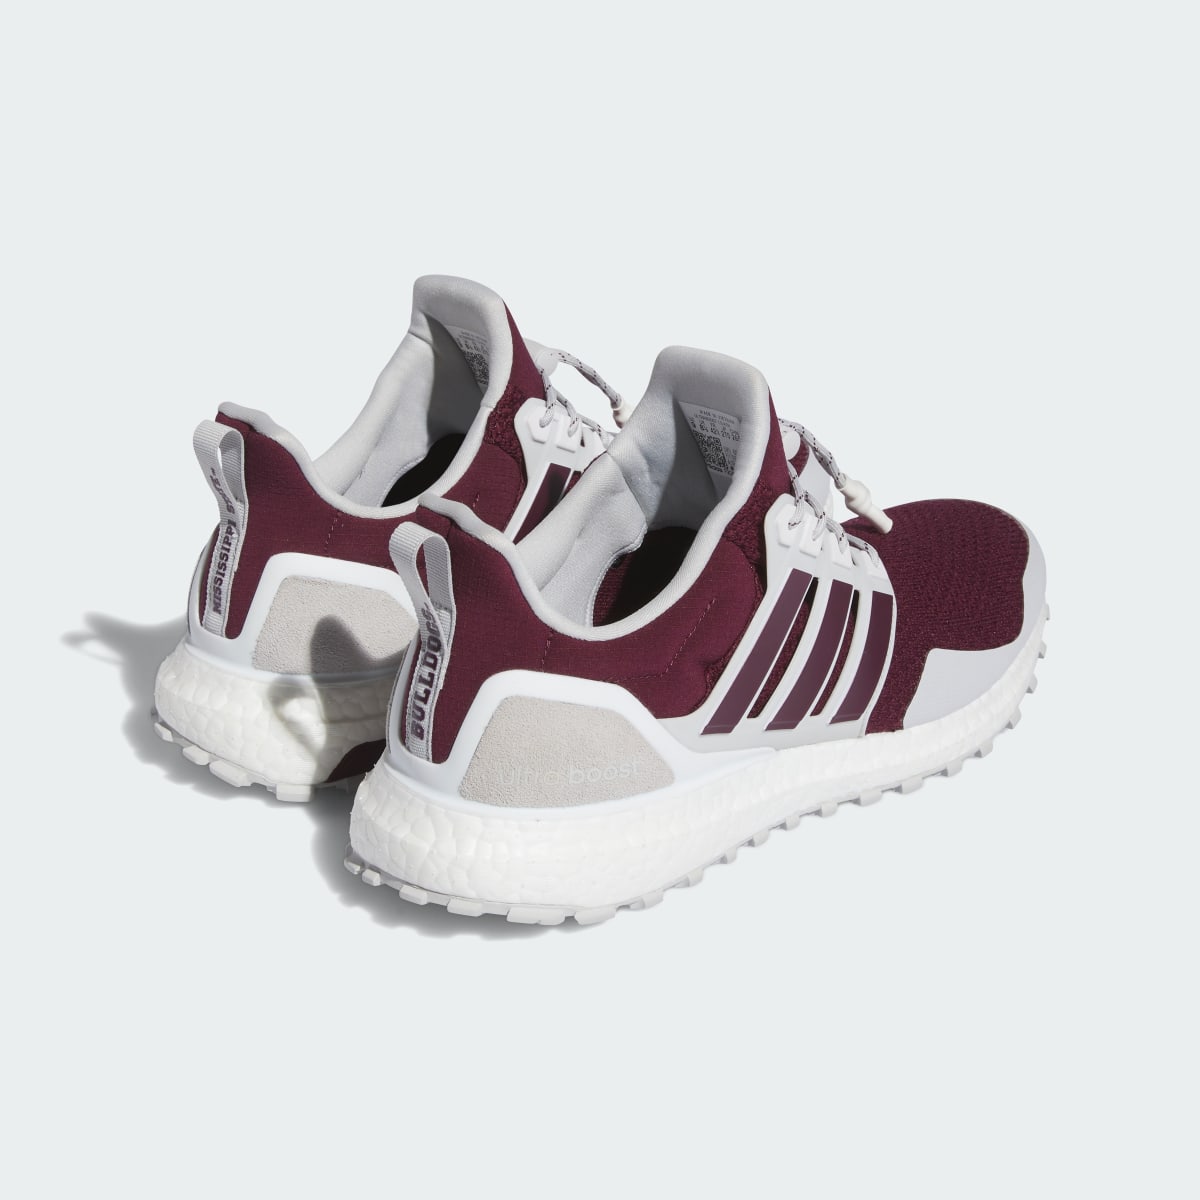 Adidas Mississippi State Ultraboost 1.0 Shoes. 6